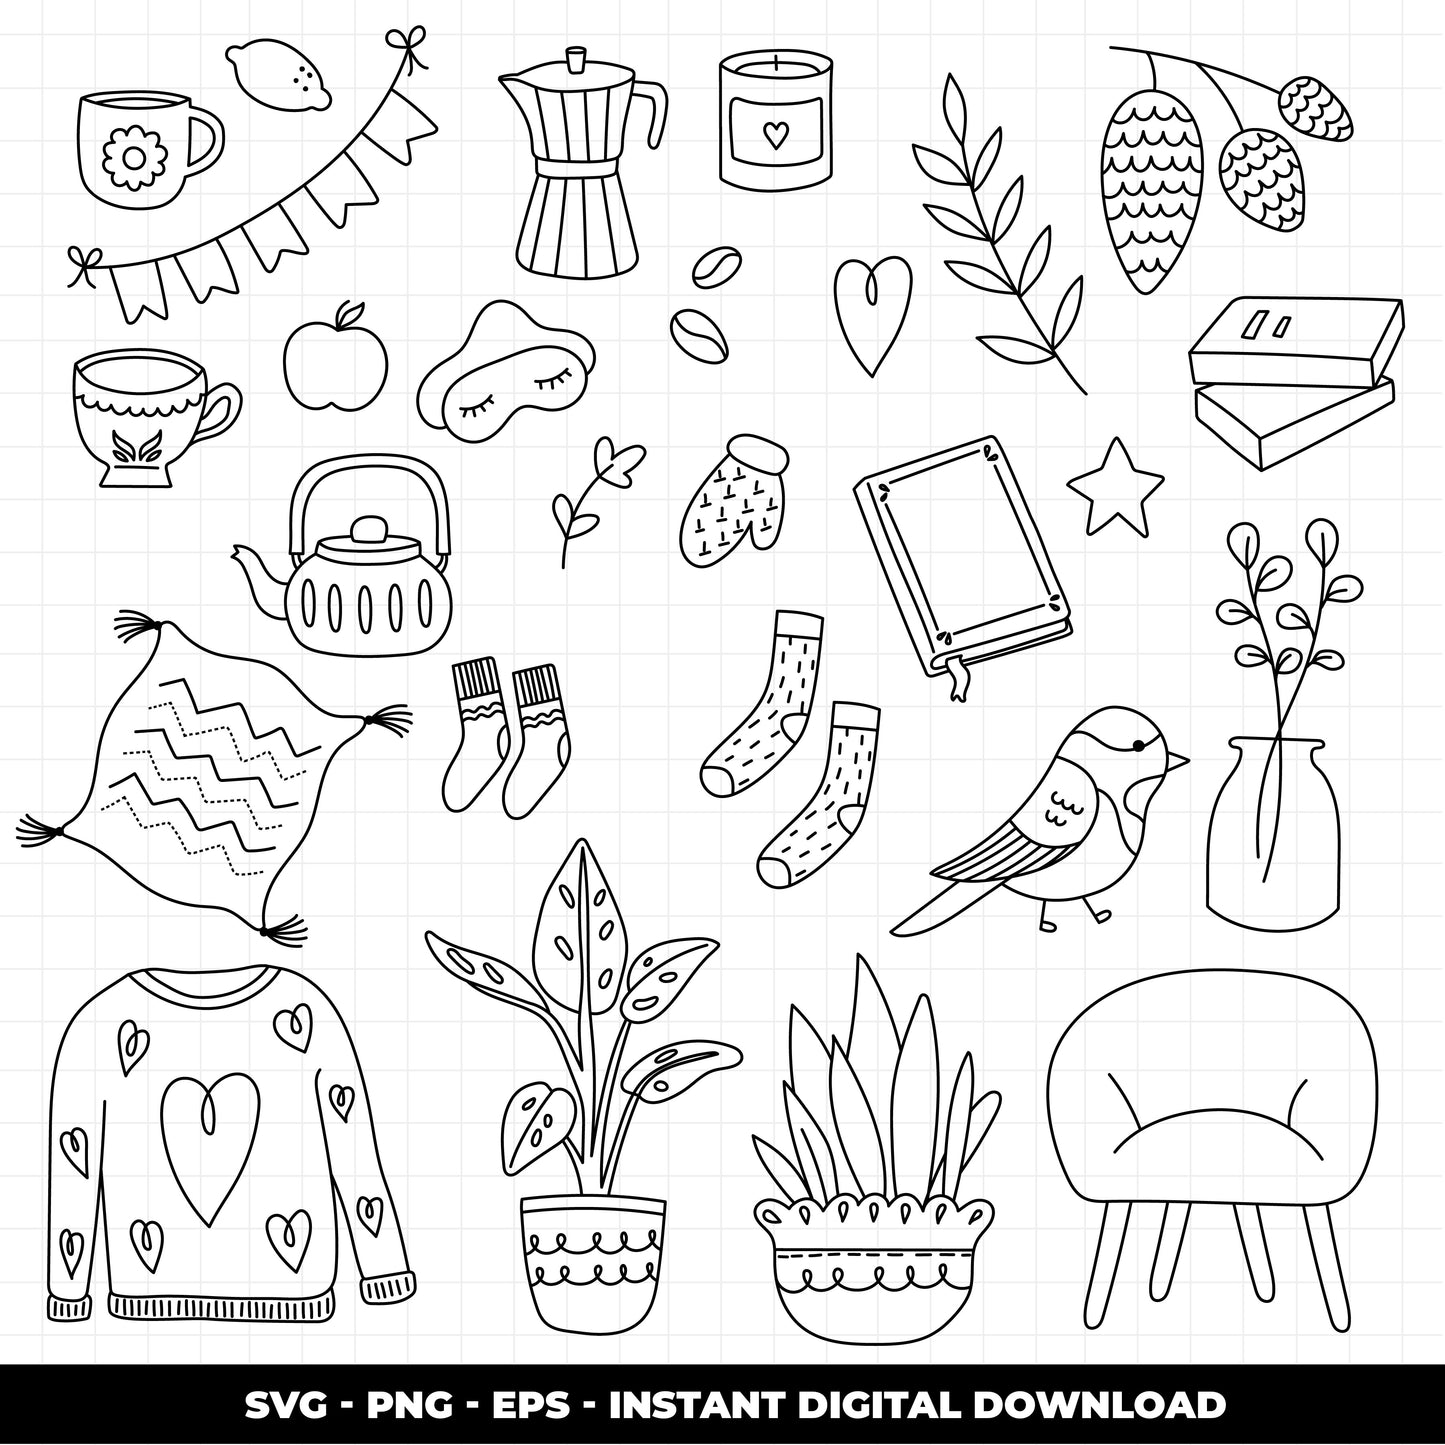 COD1397 - Autumn svg, fall clipart, Leaves clipart, Plants svg, fall svg, cozy doodle svg